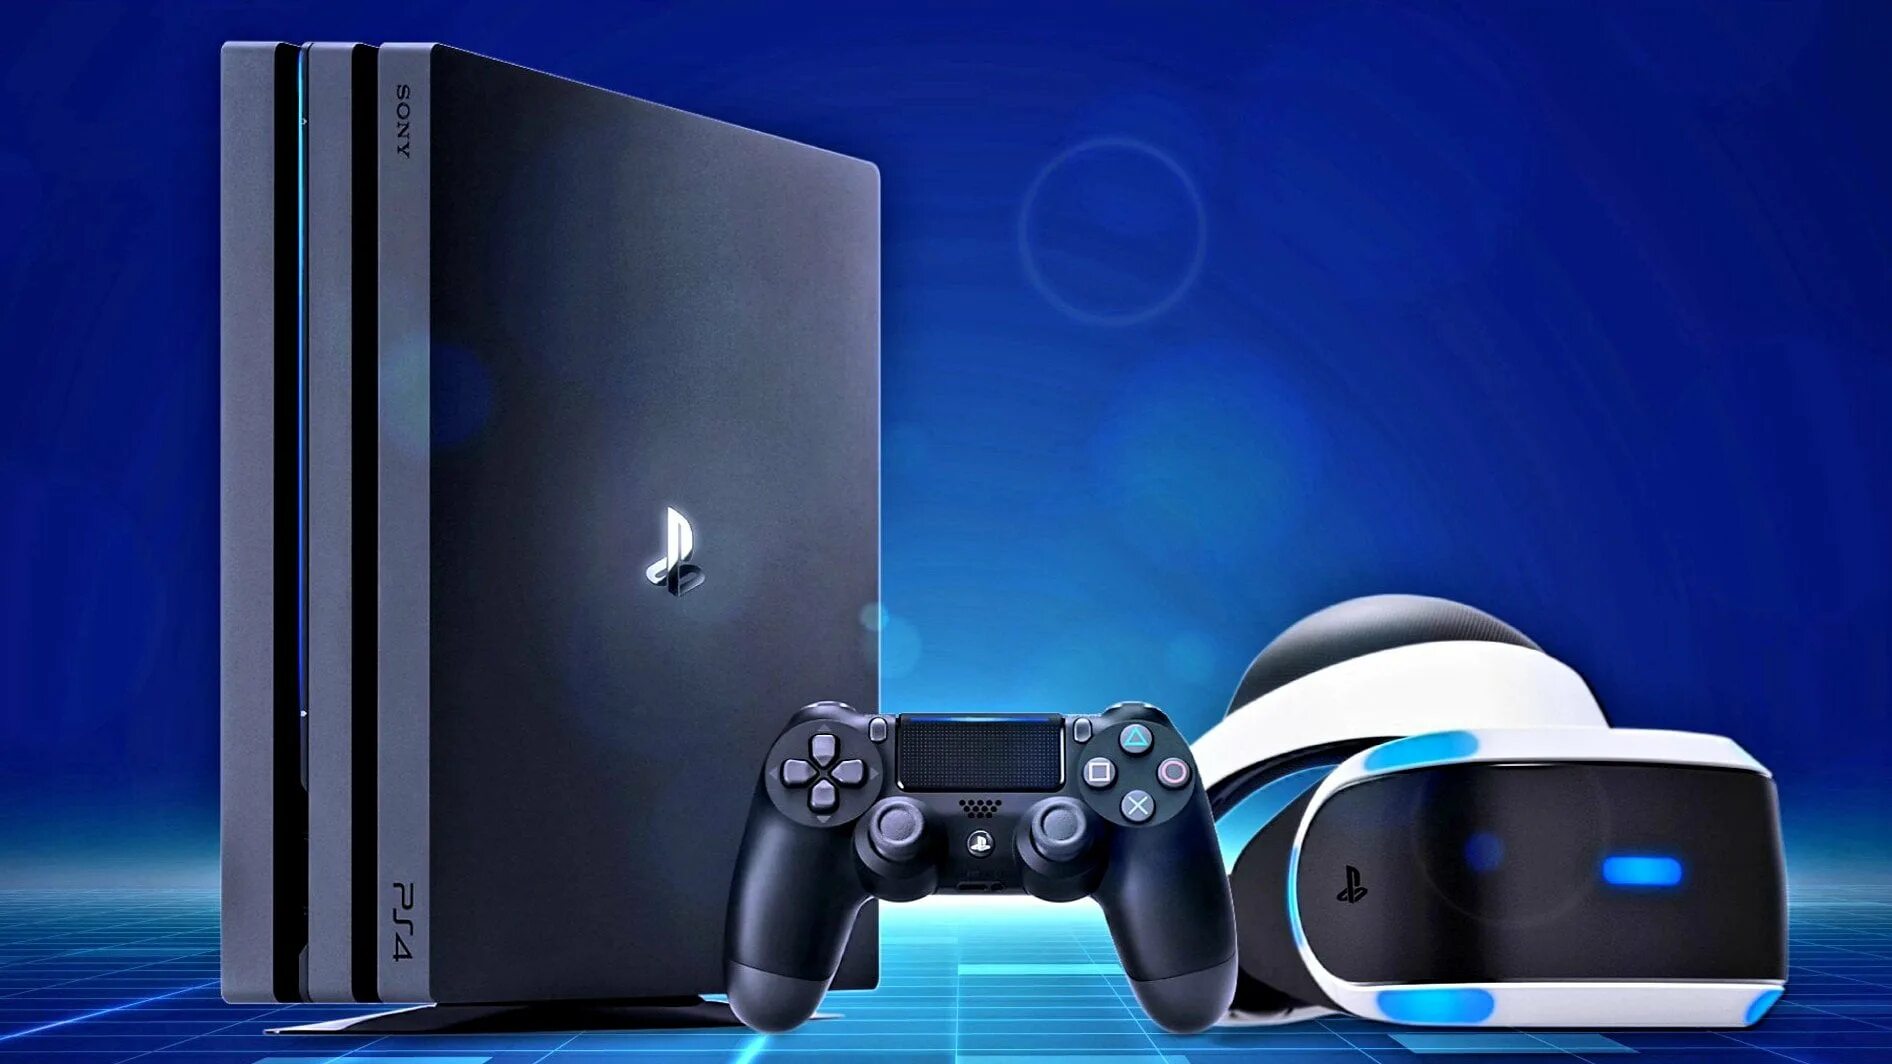 Playstation 4 pro дата. Ps4 Pro ФЗГ. PLAYSTATION 5 Pro. Sony PLAYSTATION 4 Pro Ultimate. Ps4 Pro reference.